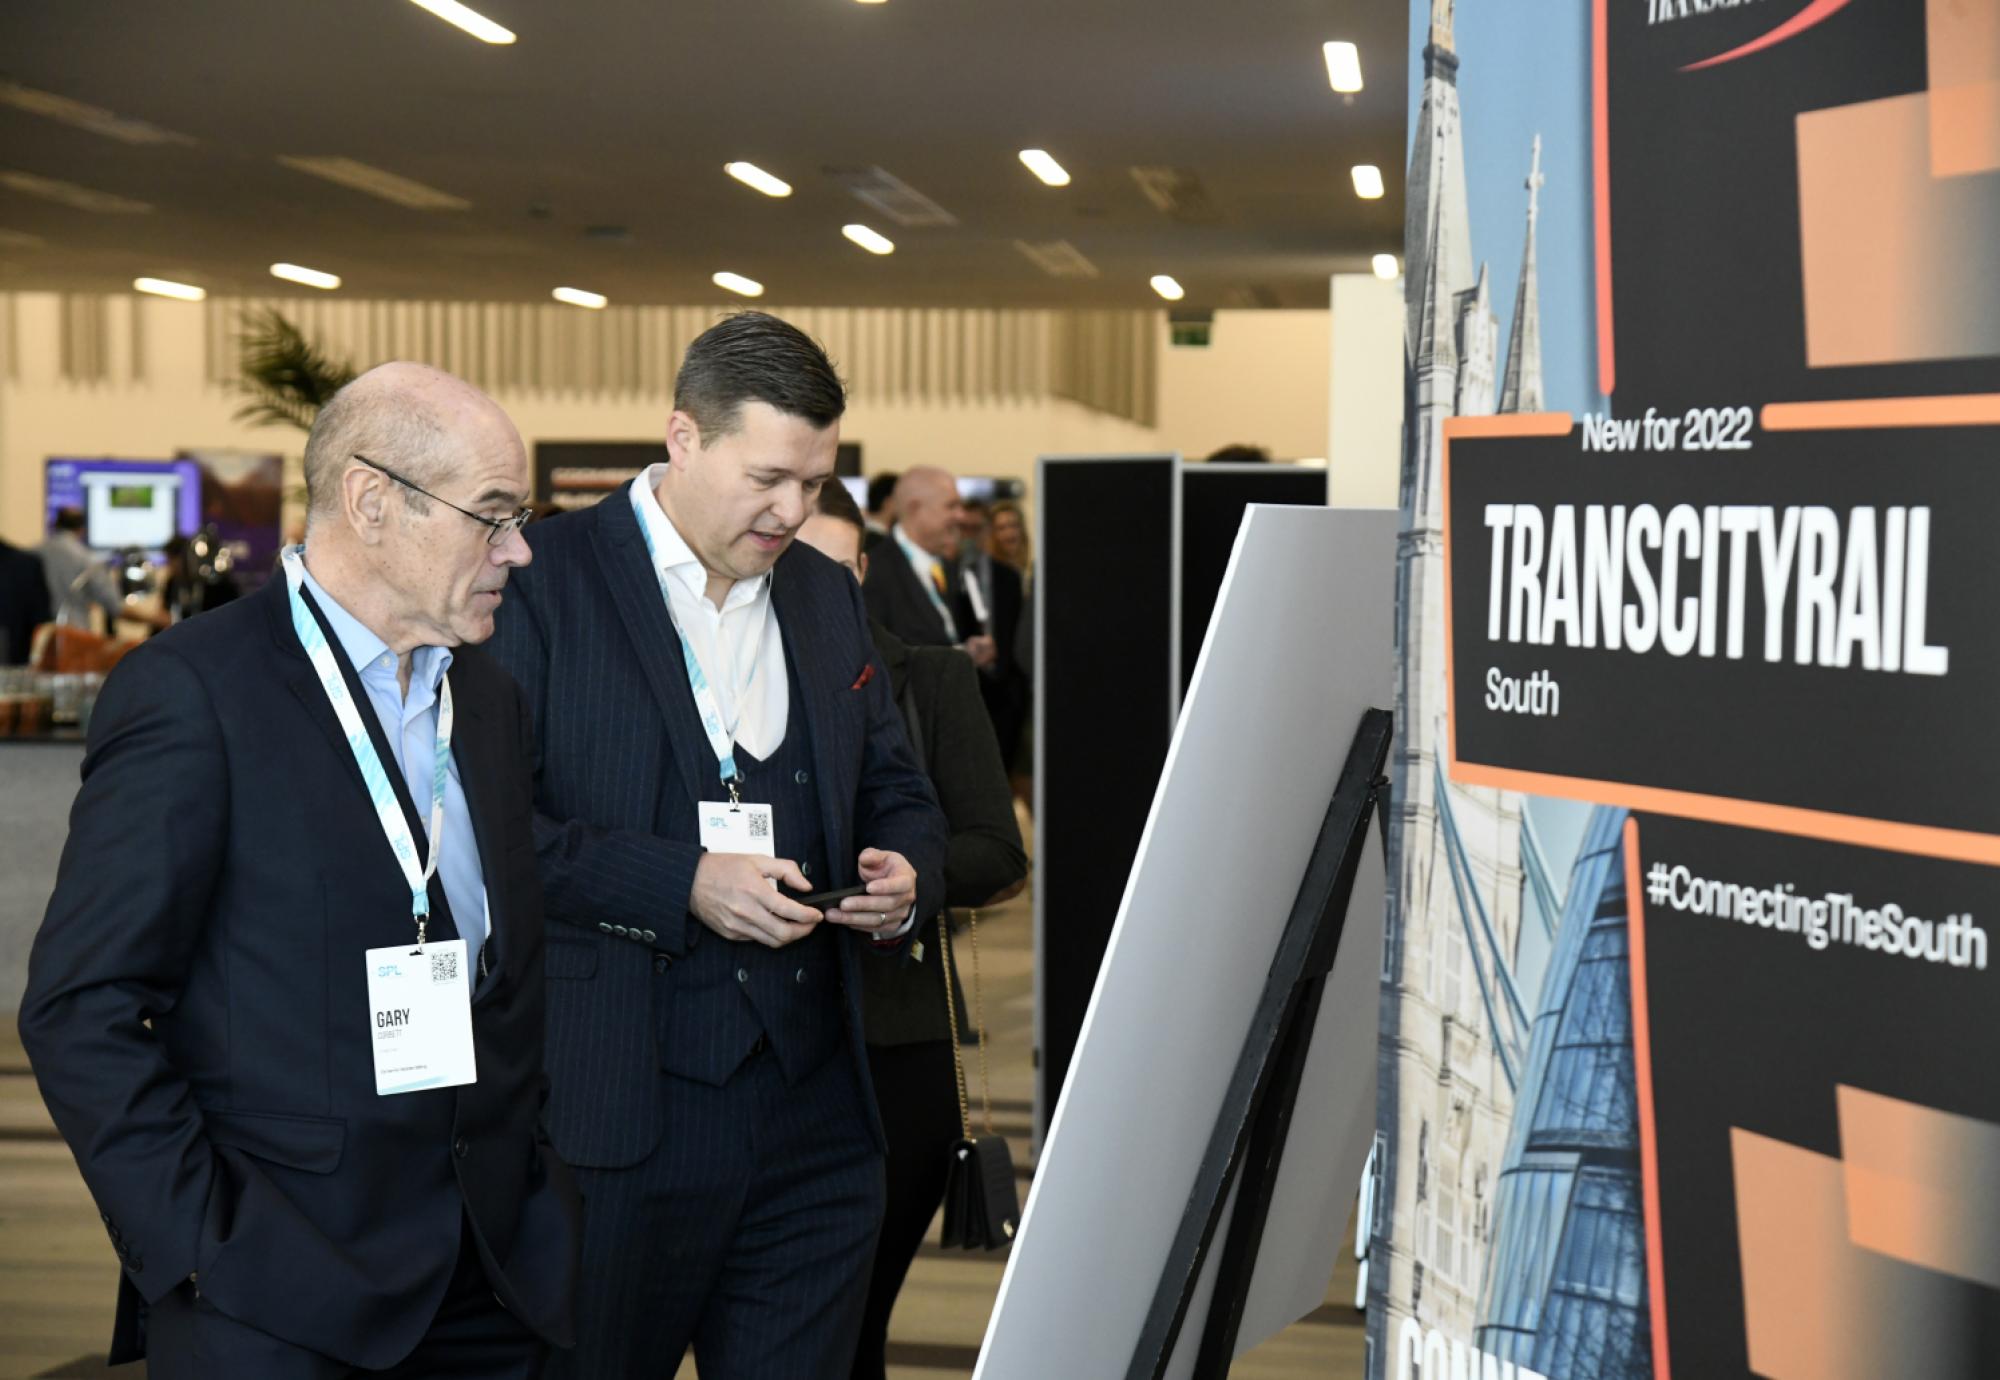 Attendees looking at exhibit at TCR Midlands 2022 event